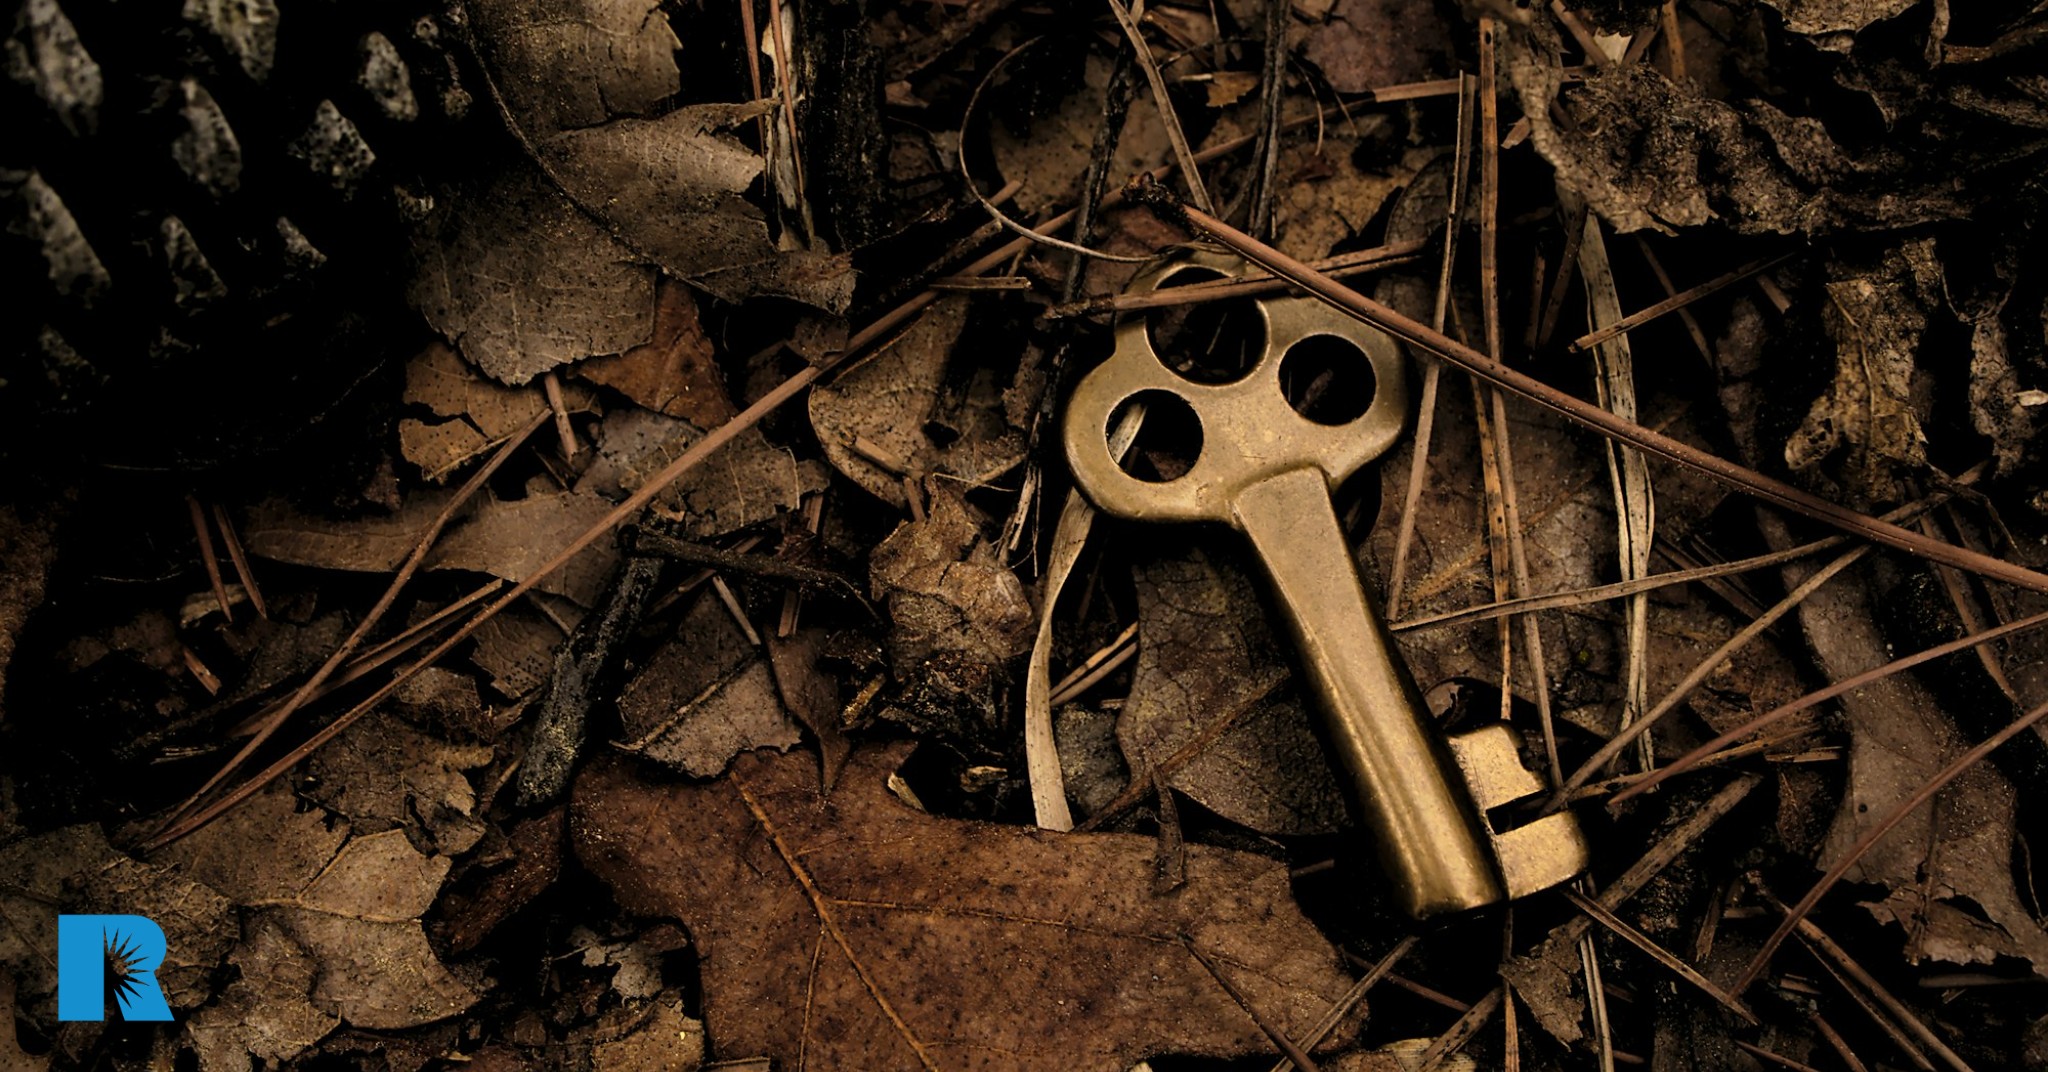 A photo illustration of a key that has been dropped in the underbrush.